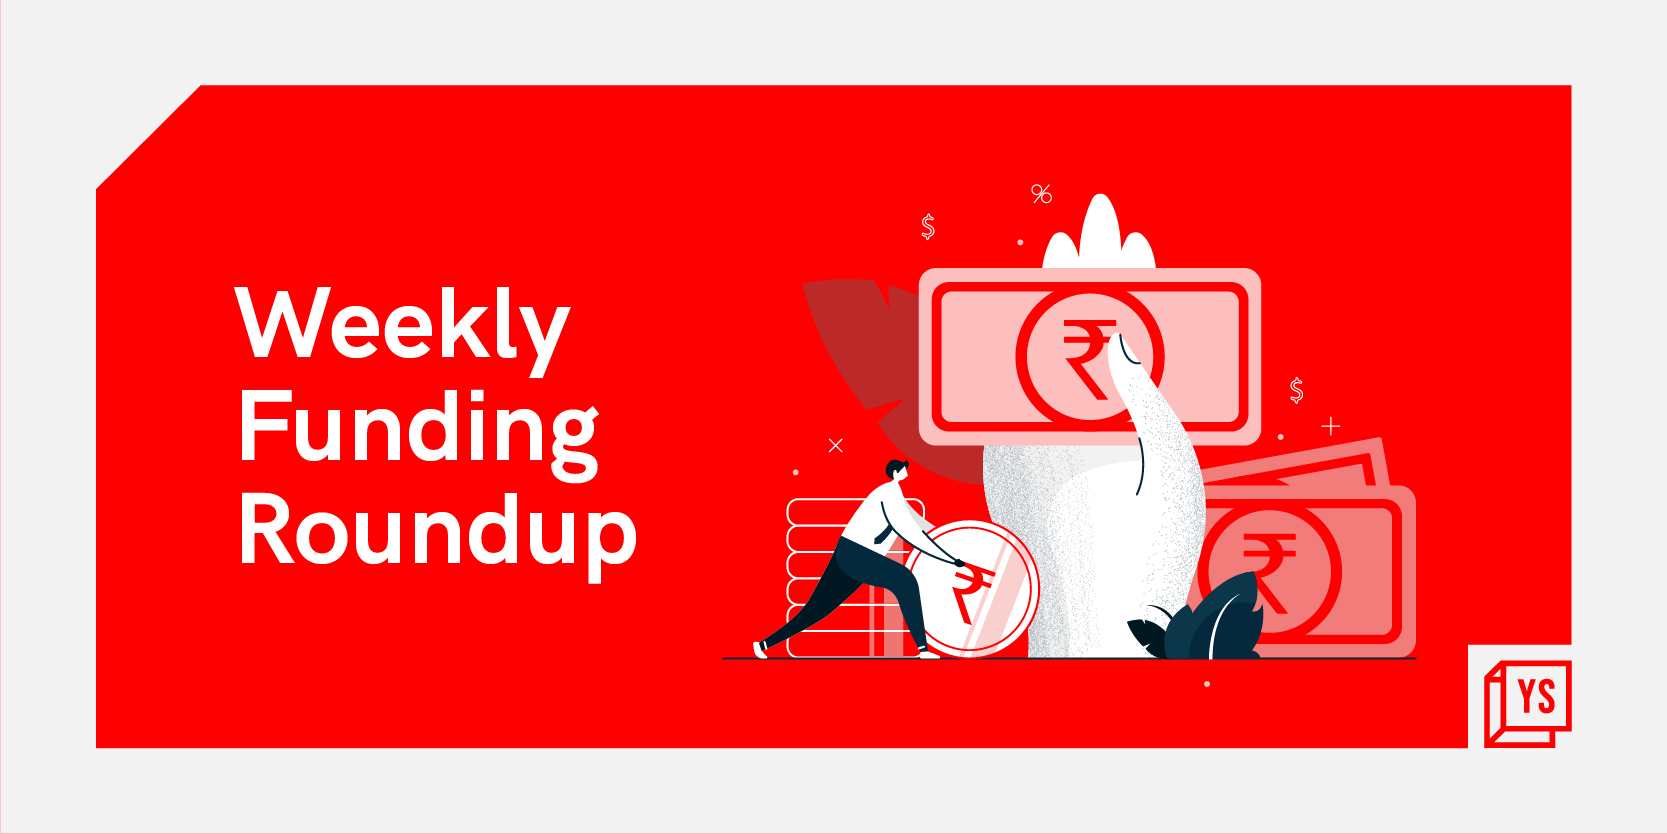 [Weekly funding roundup July 4-8] Venture capital inflow continues to decline